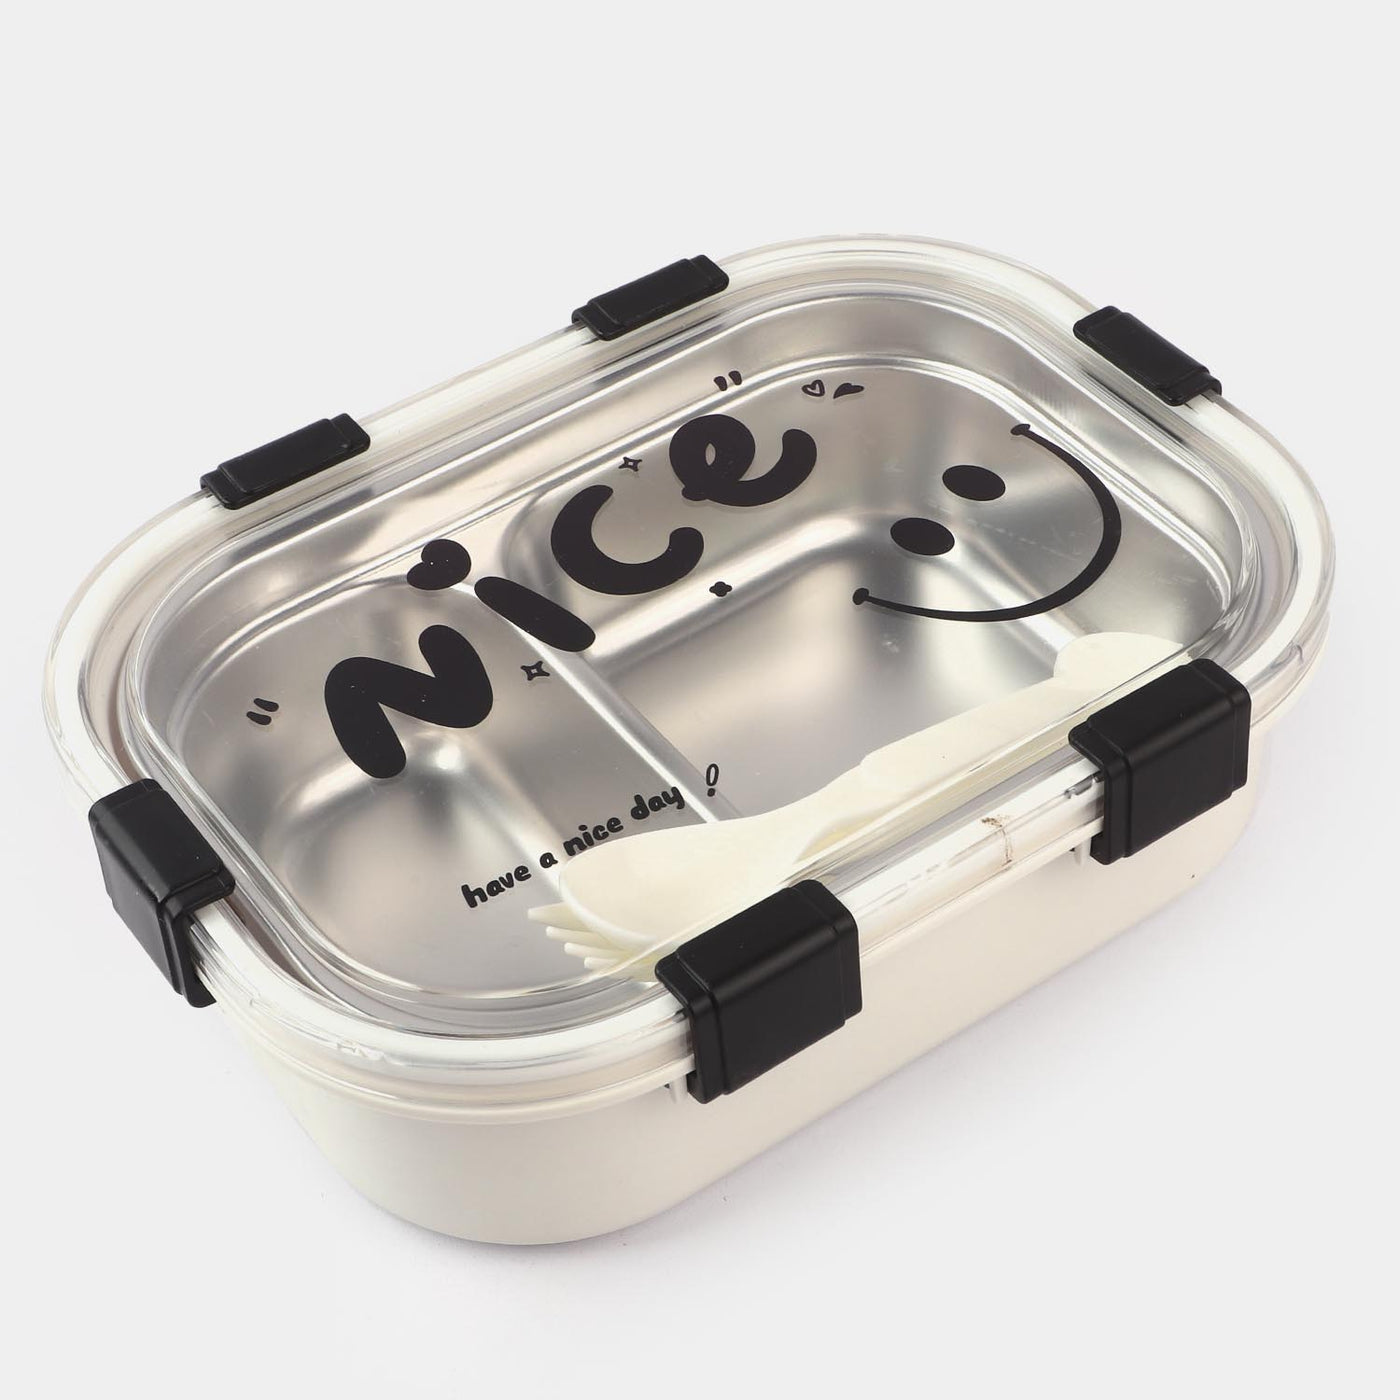 STAINLESS STEEL LUNCH BOX FOR KIDS